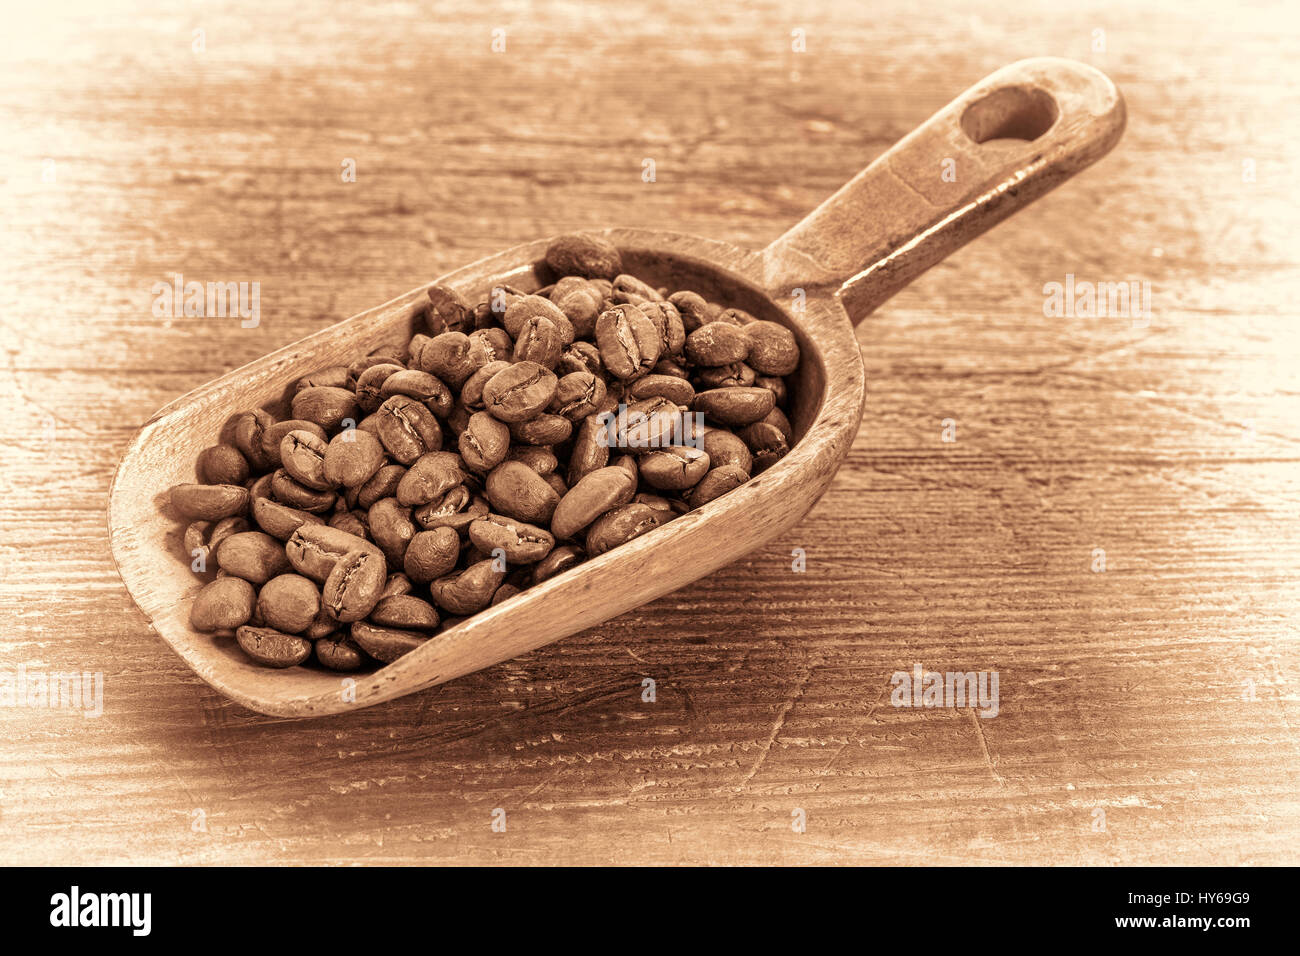 rustic scoop of roasted coffee beans against a grunge painted wood background, retro sepia toning Stock Photo